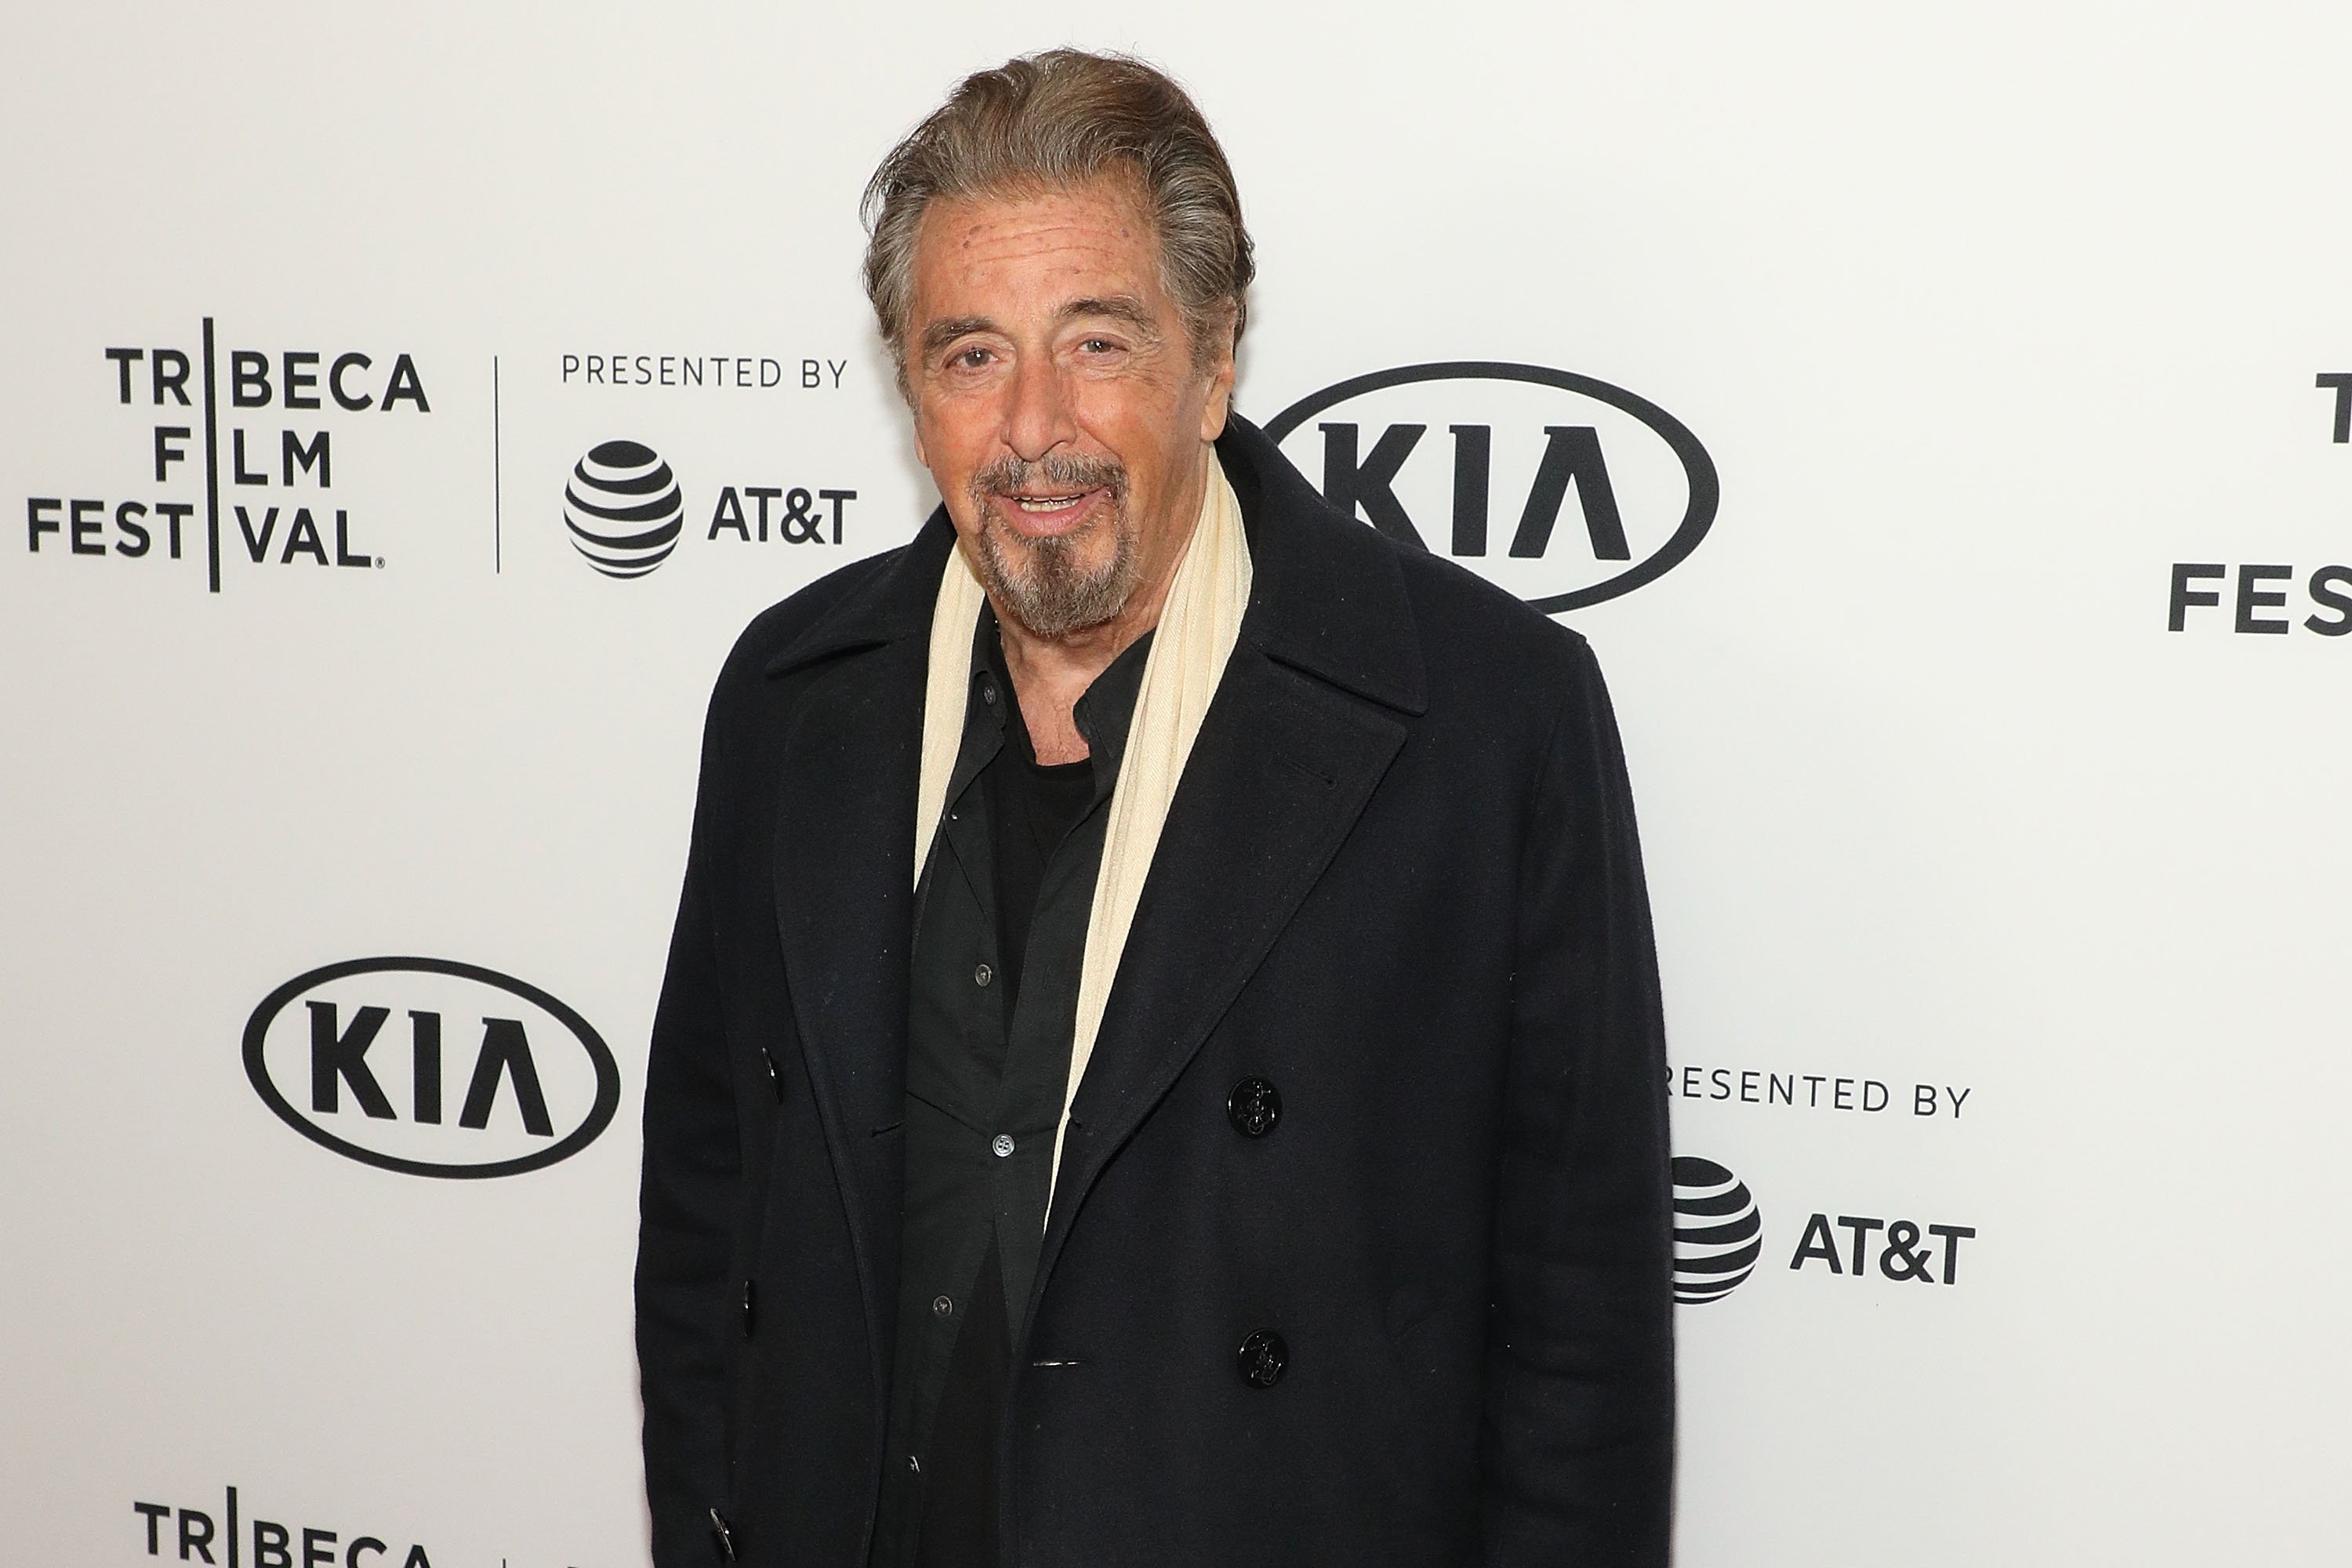 Actor Al Pacino attends a screening of "Scarface" during the 2018 Tribeca Film Festival at Beacon Theatre on April 19, 2018 in New York City. | Source: Getty Images